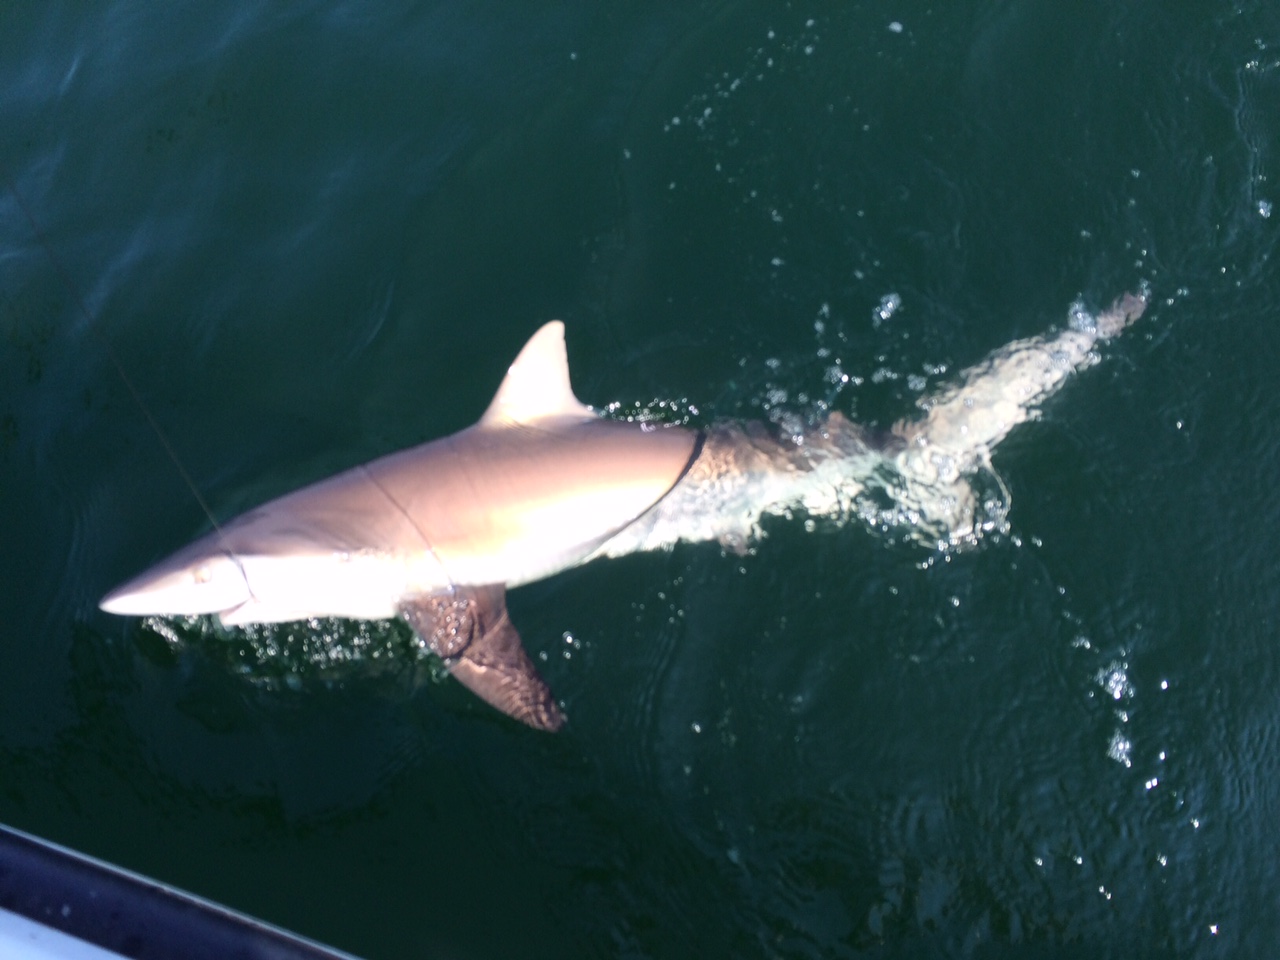 Jersey Cape Guide Service: Afternoon Sharks